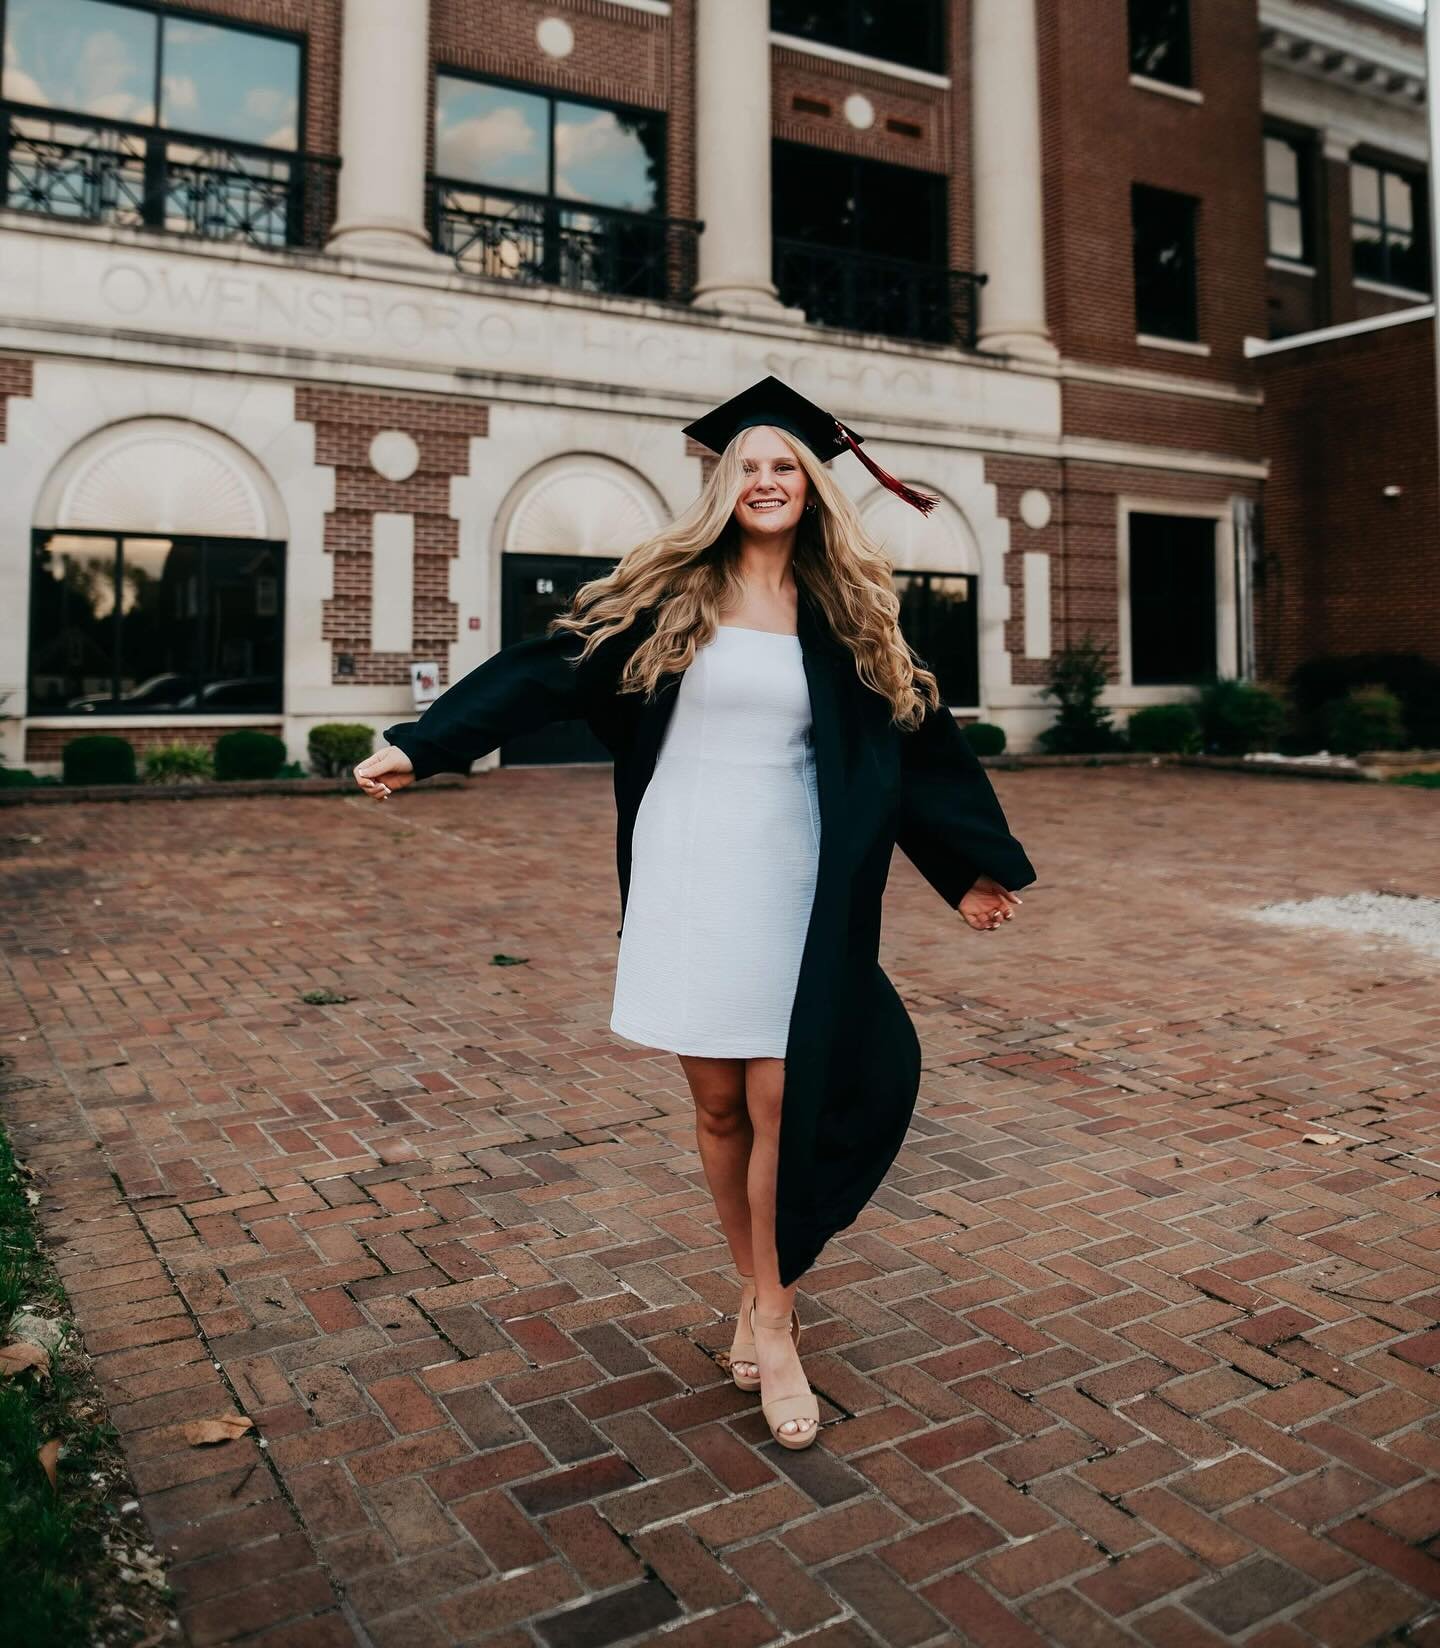 🎓✨If you&rsquo;re not having a cap and gown session as part of your senior photo shoot, you&rsquo;re really missing out! This session is truly a celebration of the end of your high school journey. You&rsquo;ll always want to look back on these photo